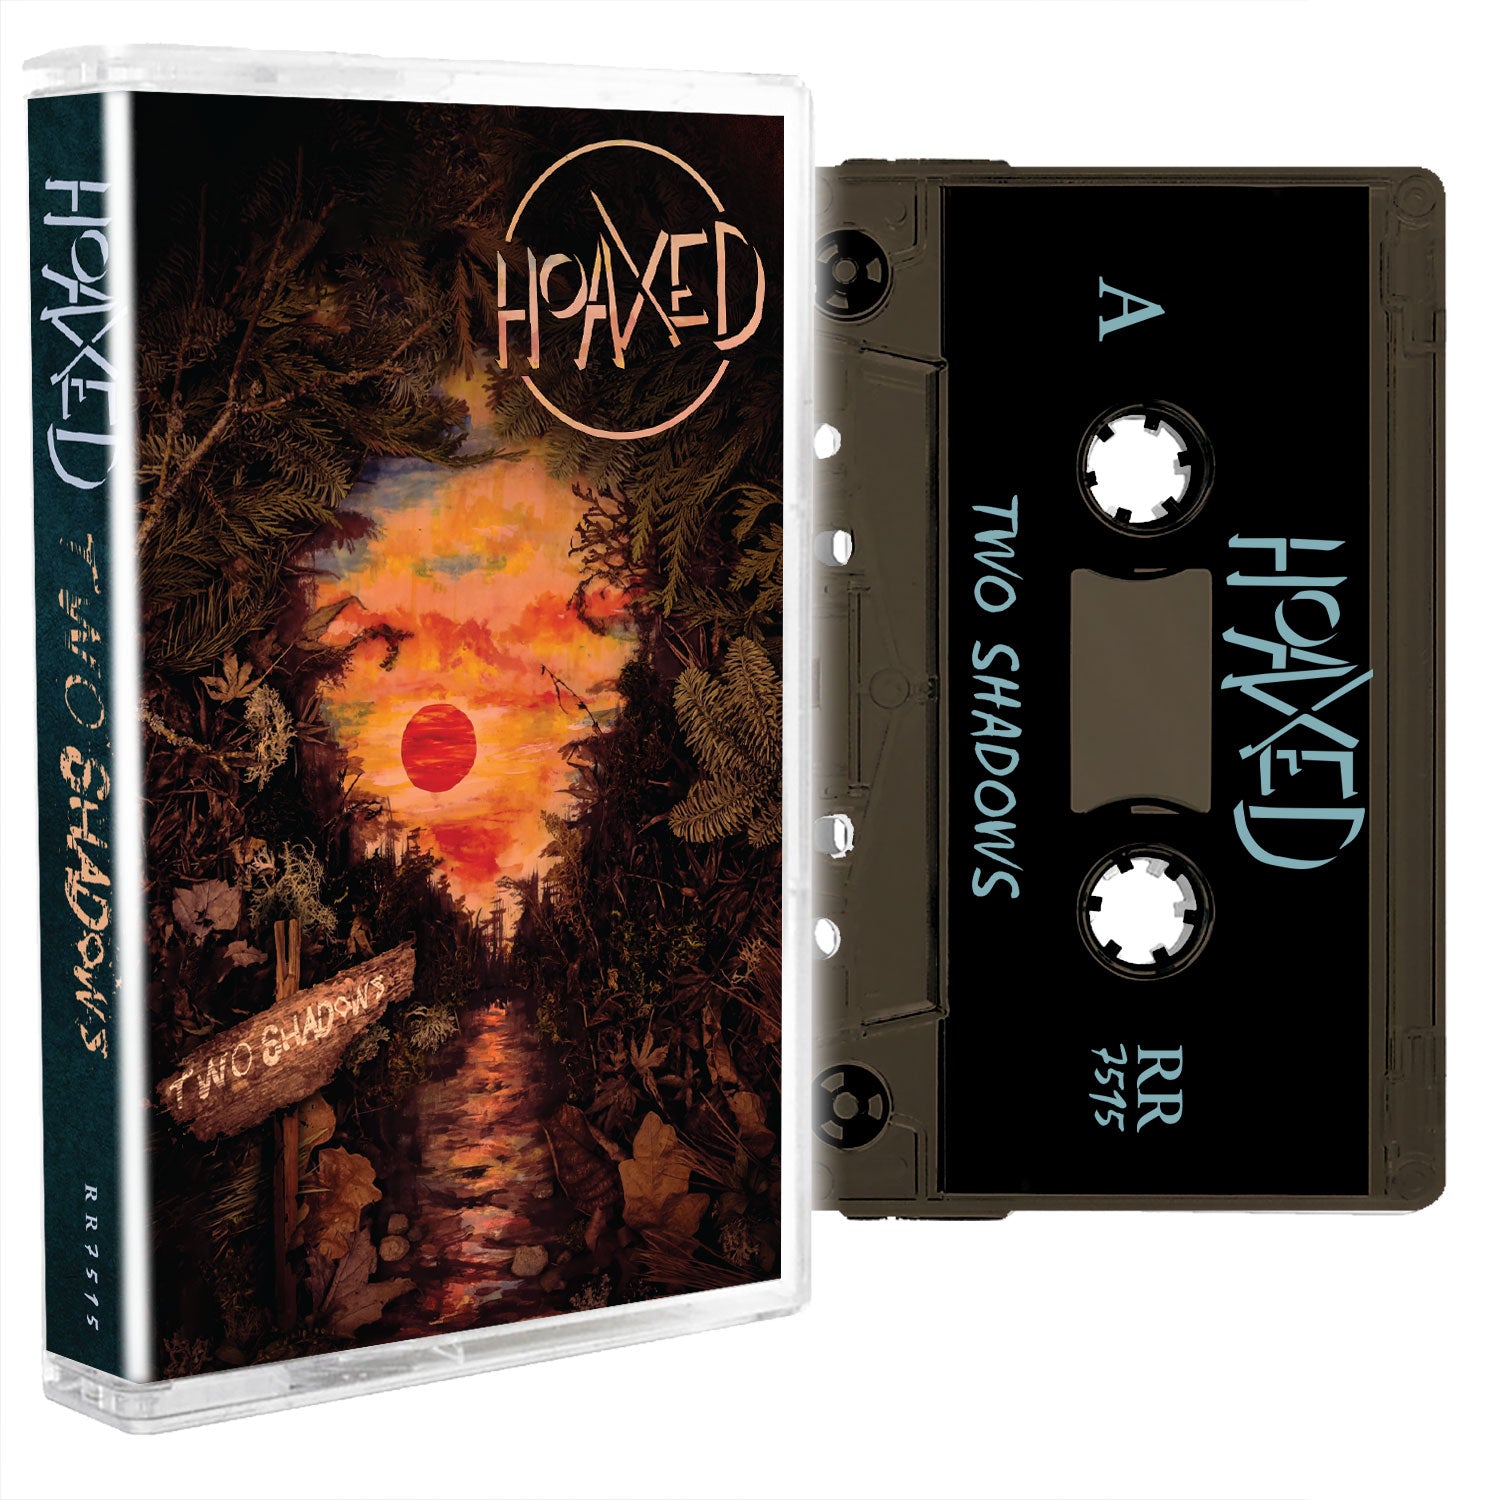 Hoaxed "Two Shadows" Cassette